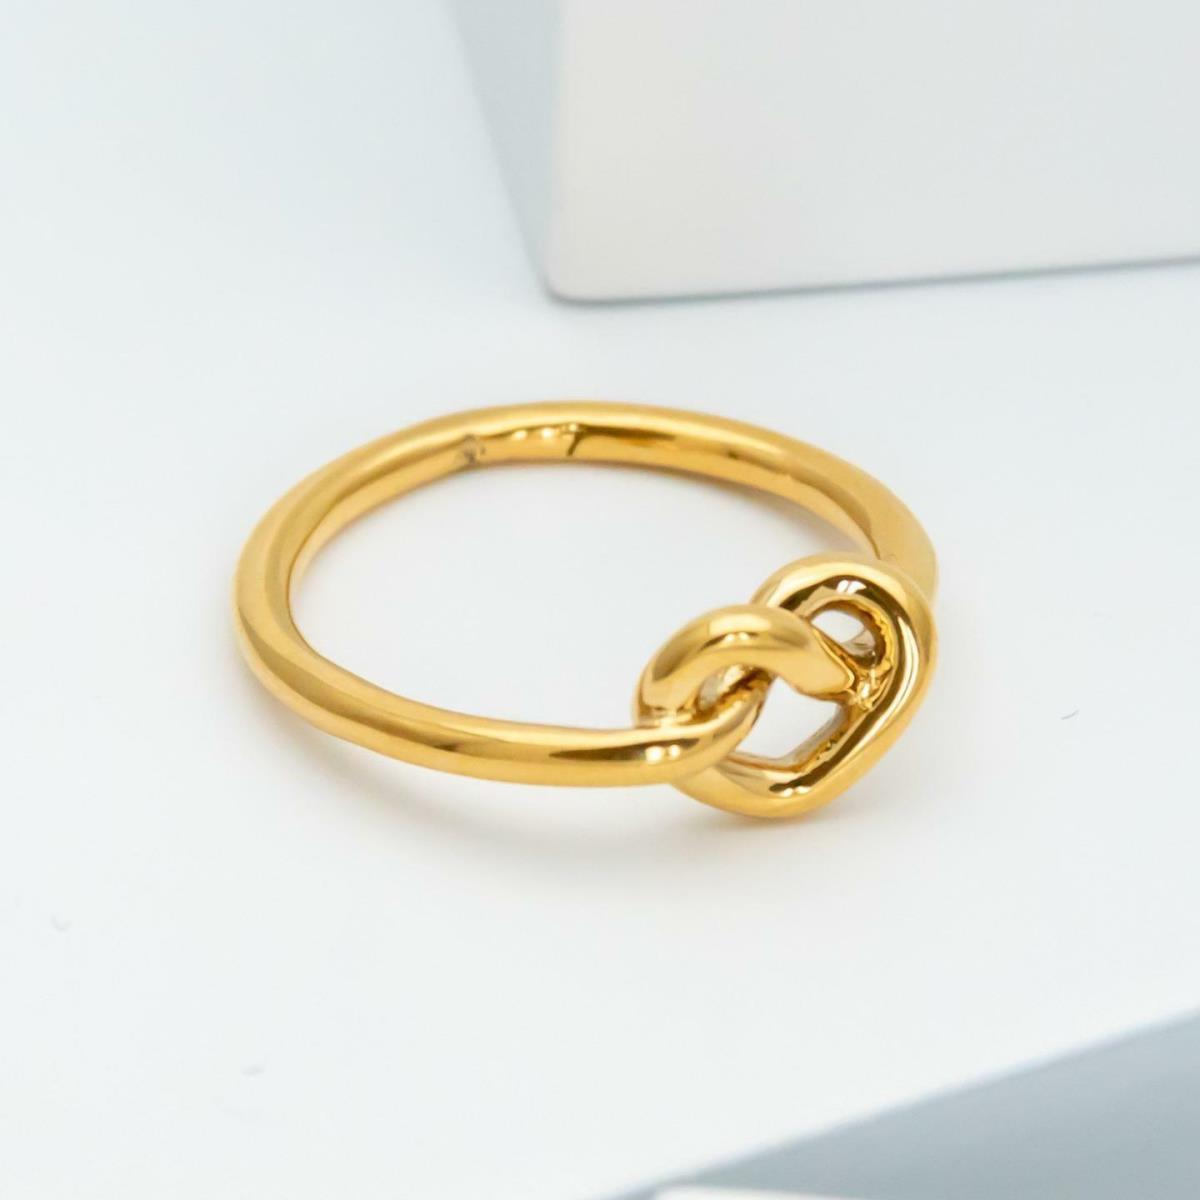 New Kate Spade New York Loves Me Knot Ring WBRUH313 Size 7